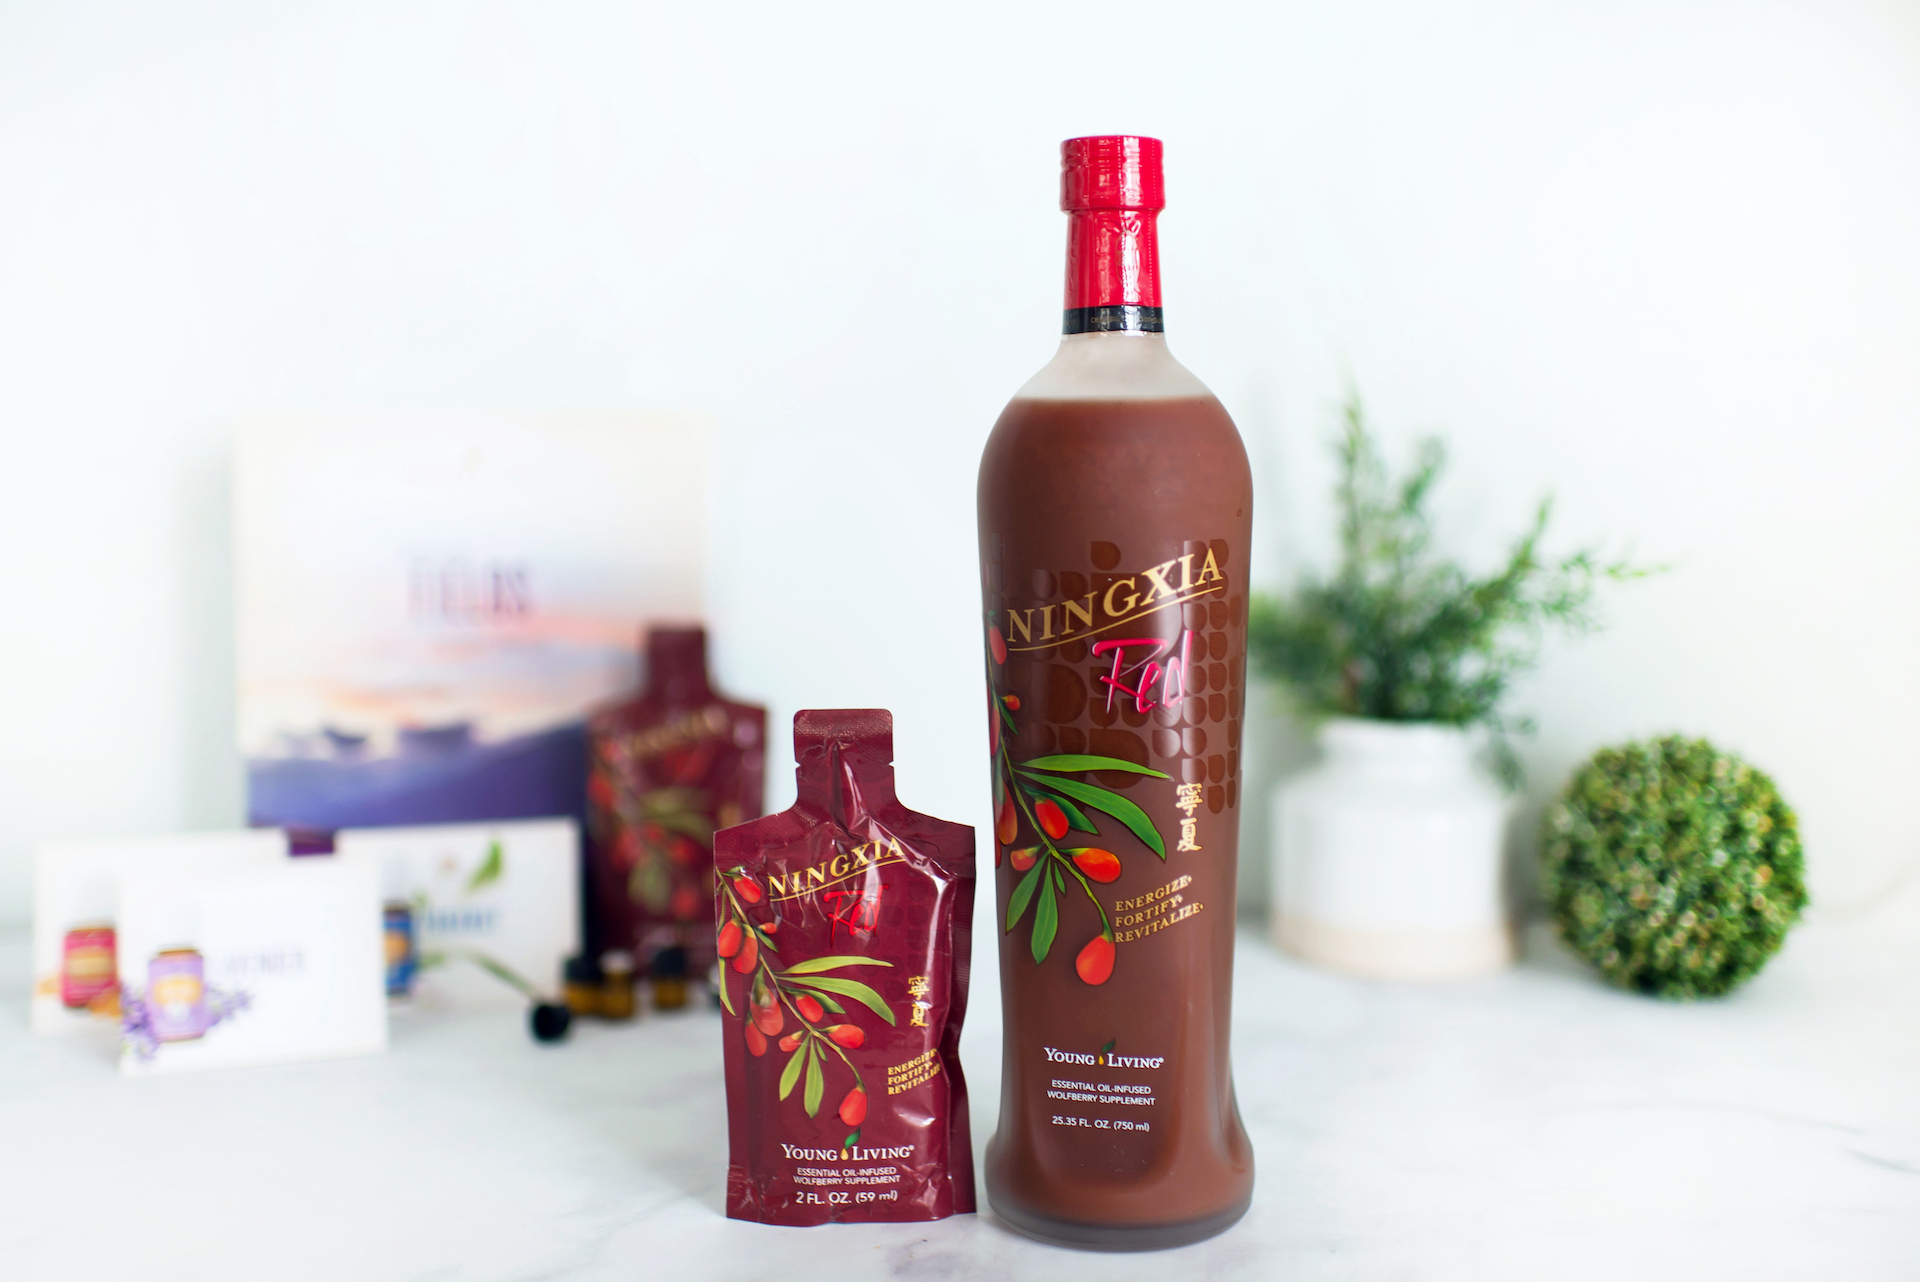 Ningxia Red: Is it Really Worth - Alexandria Hinders